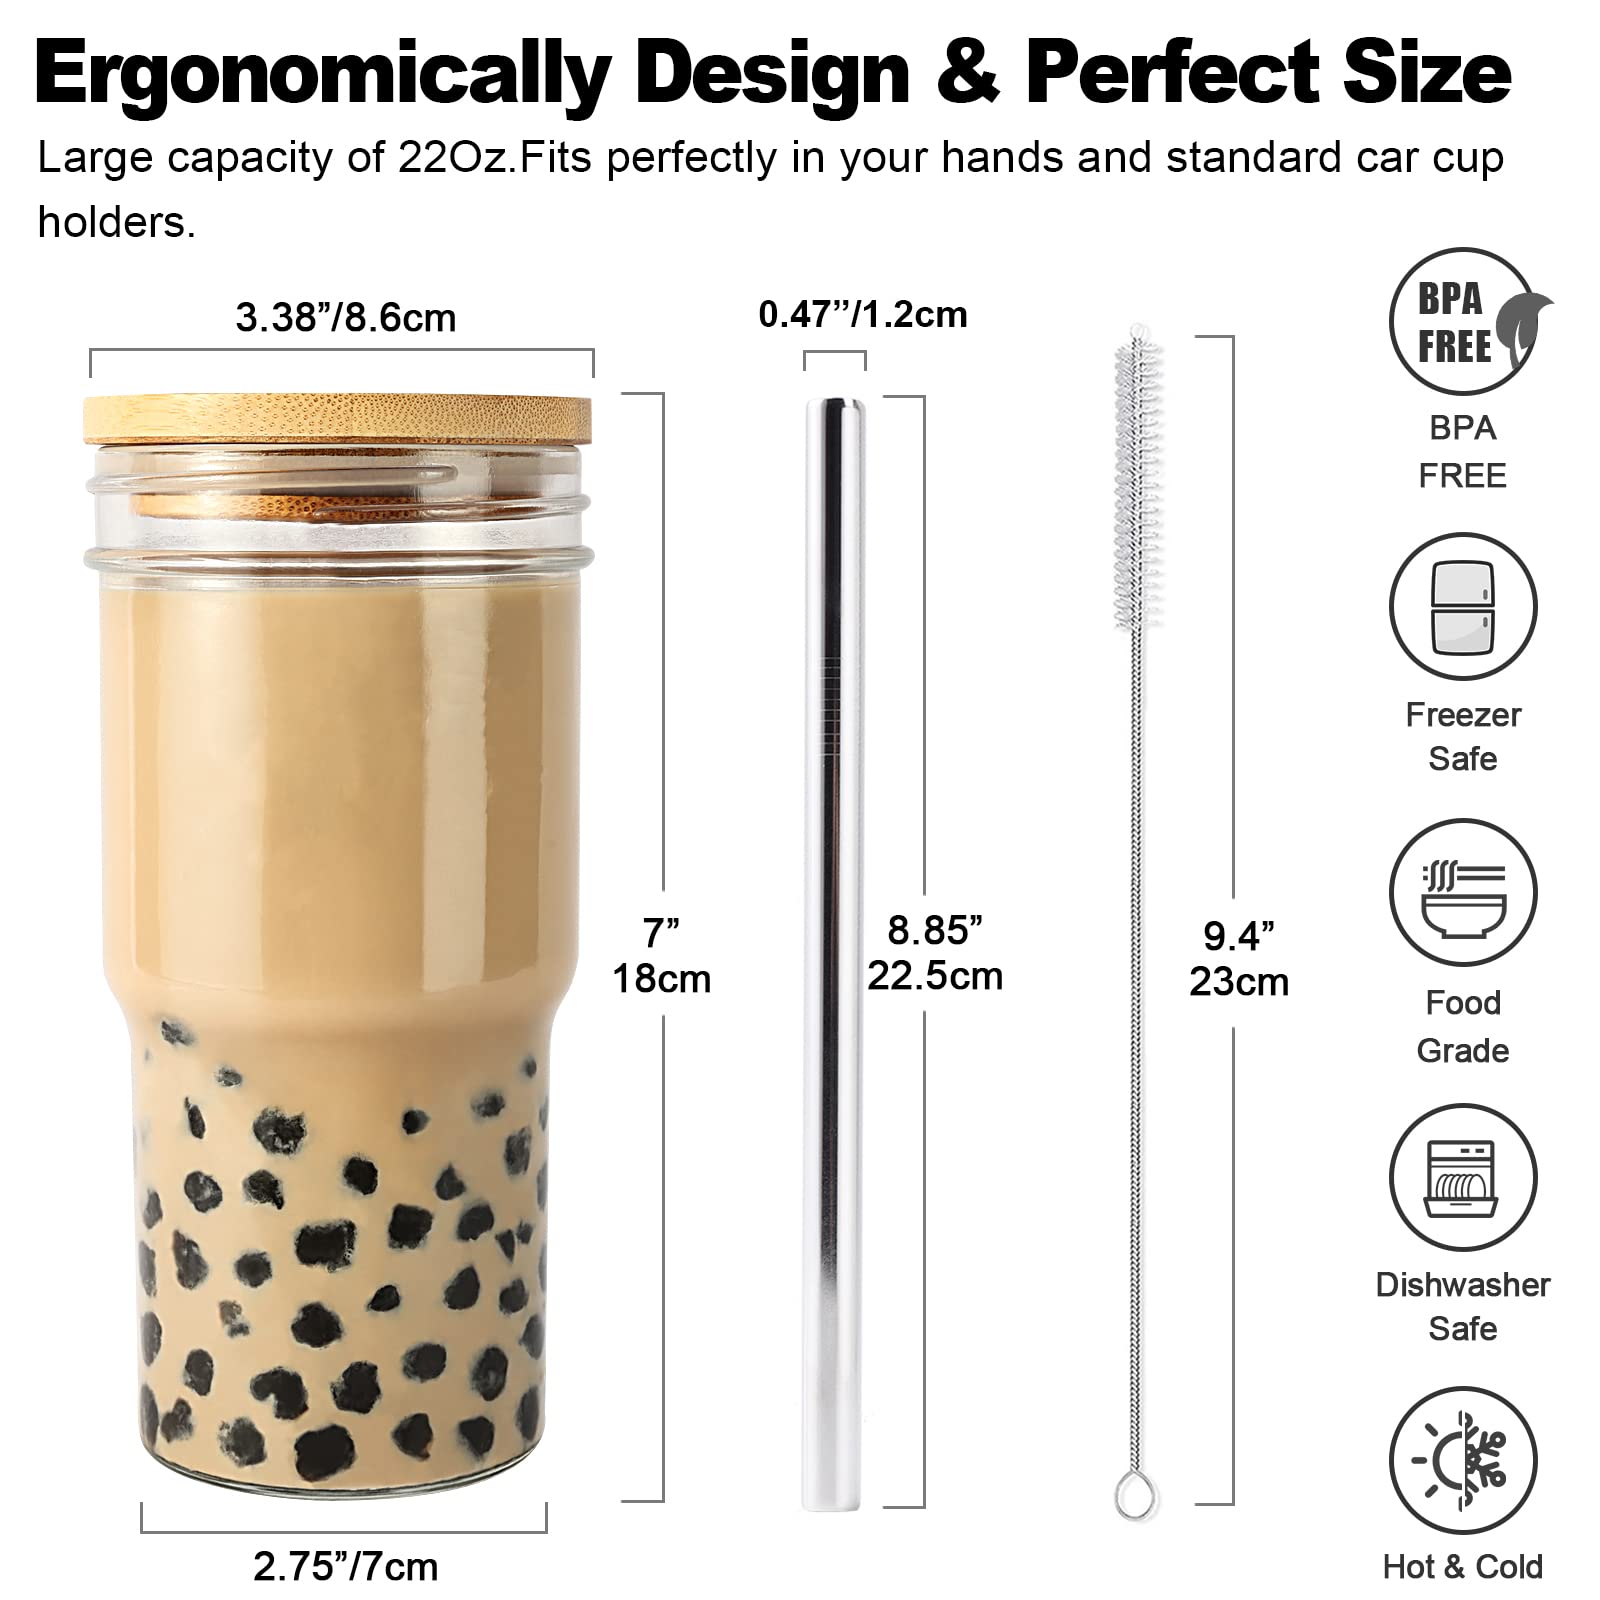 Reusable Boba Cup Smoothie Cup Boba Tea Cups, 2 Pack Wide Mouth 22oz Glasse Iced Coffee Cup with Bamboo Lid and Straw, Mason Jar Cup Drinking Glasses Tumbler with Straw and Lid (Silver Straw, 2)